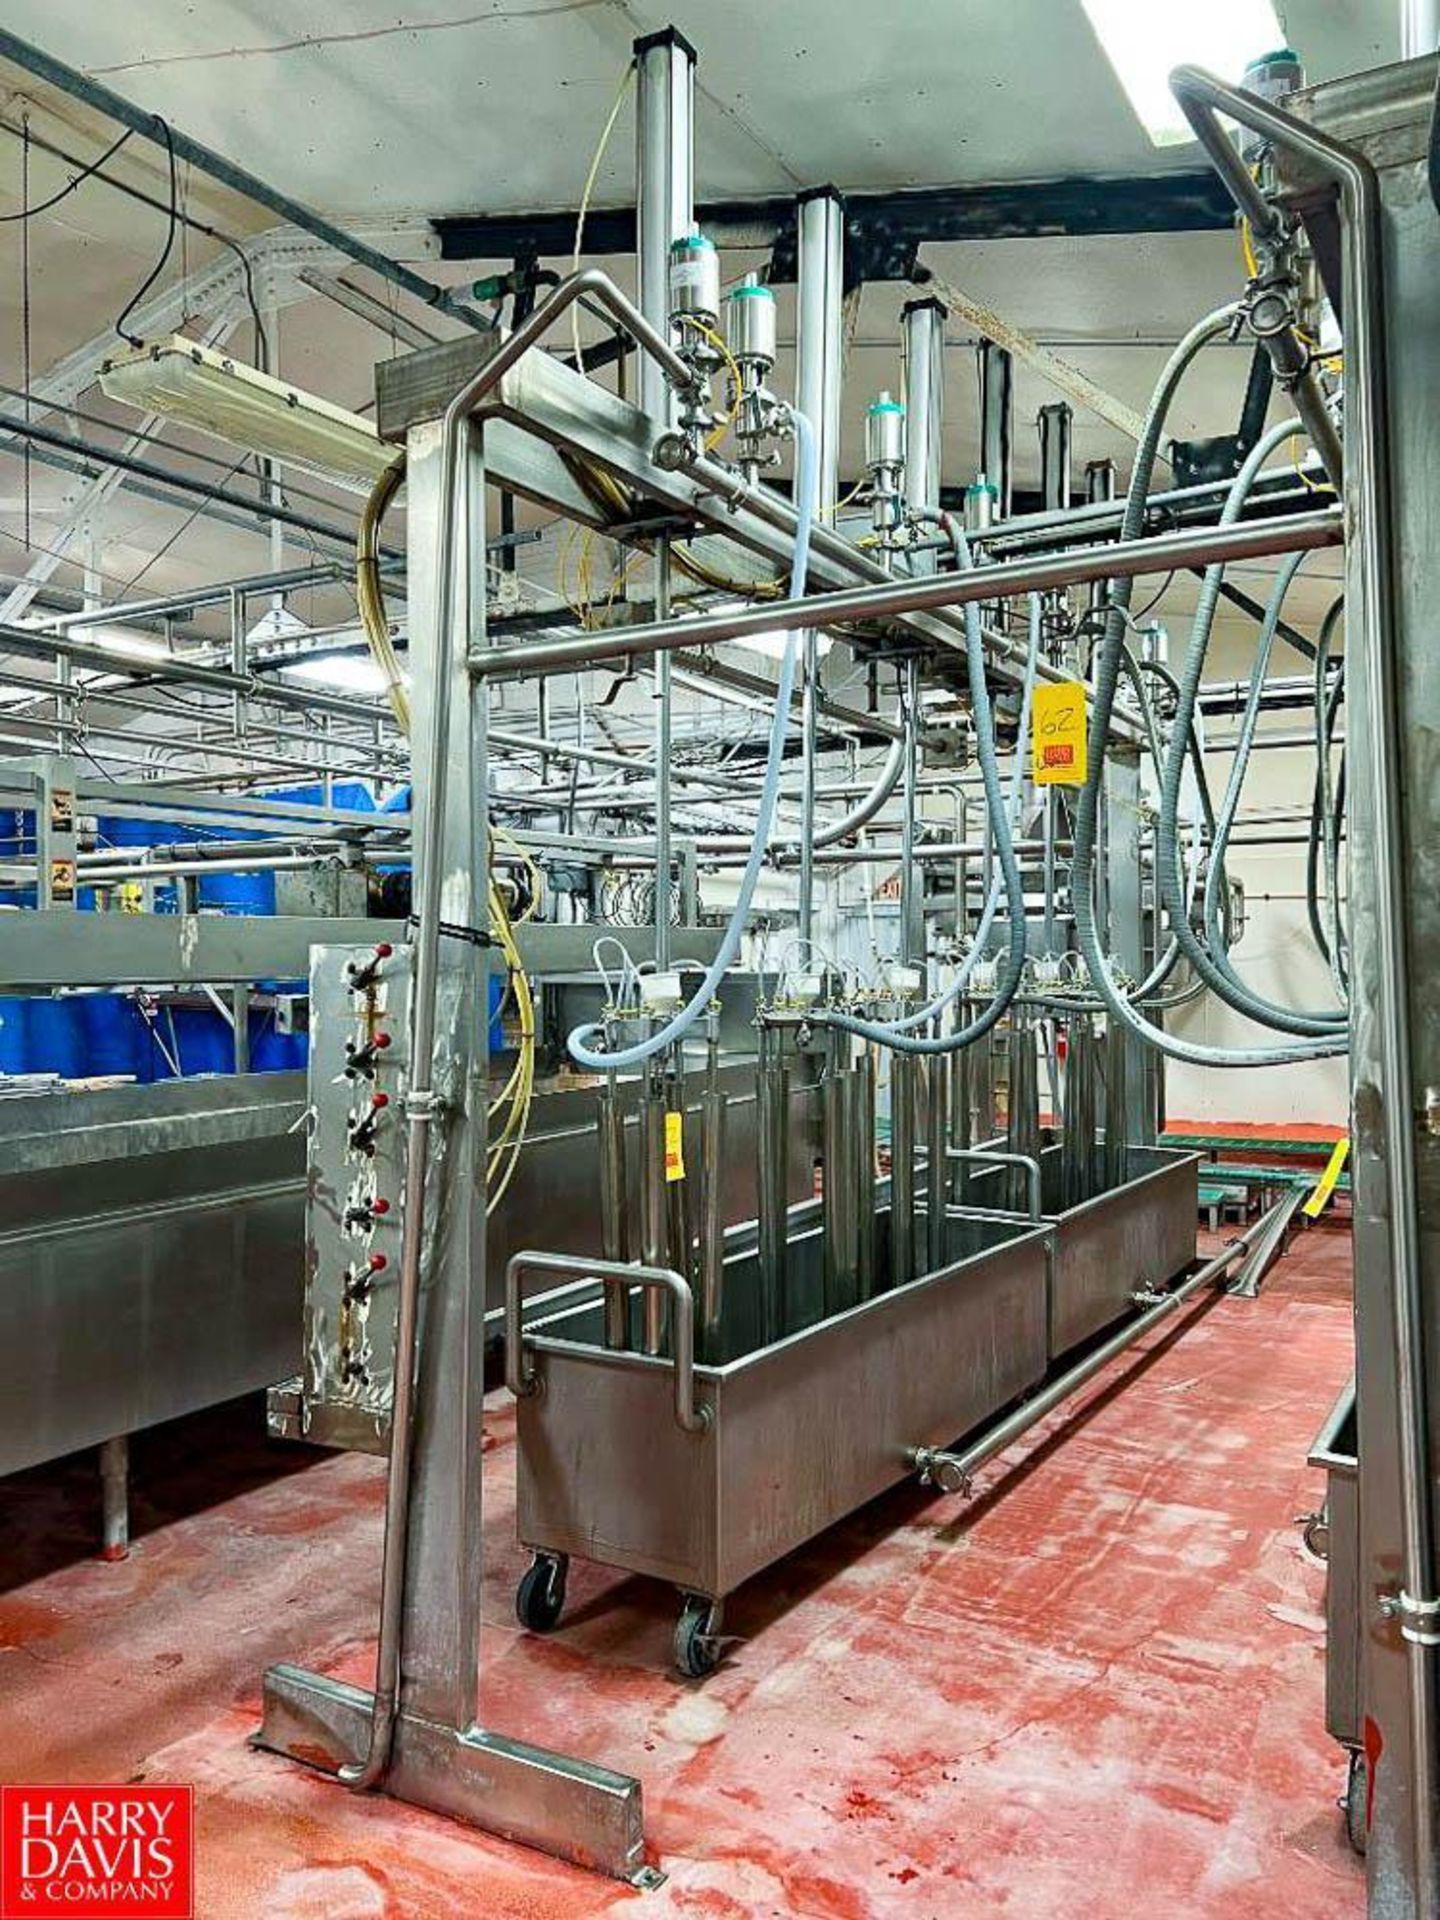 6-Head, Pneumatic Whey/Curd Injection System - Rigging Fee: $2000